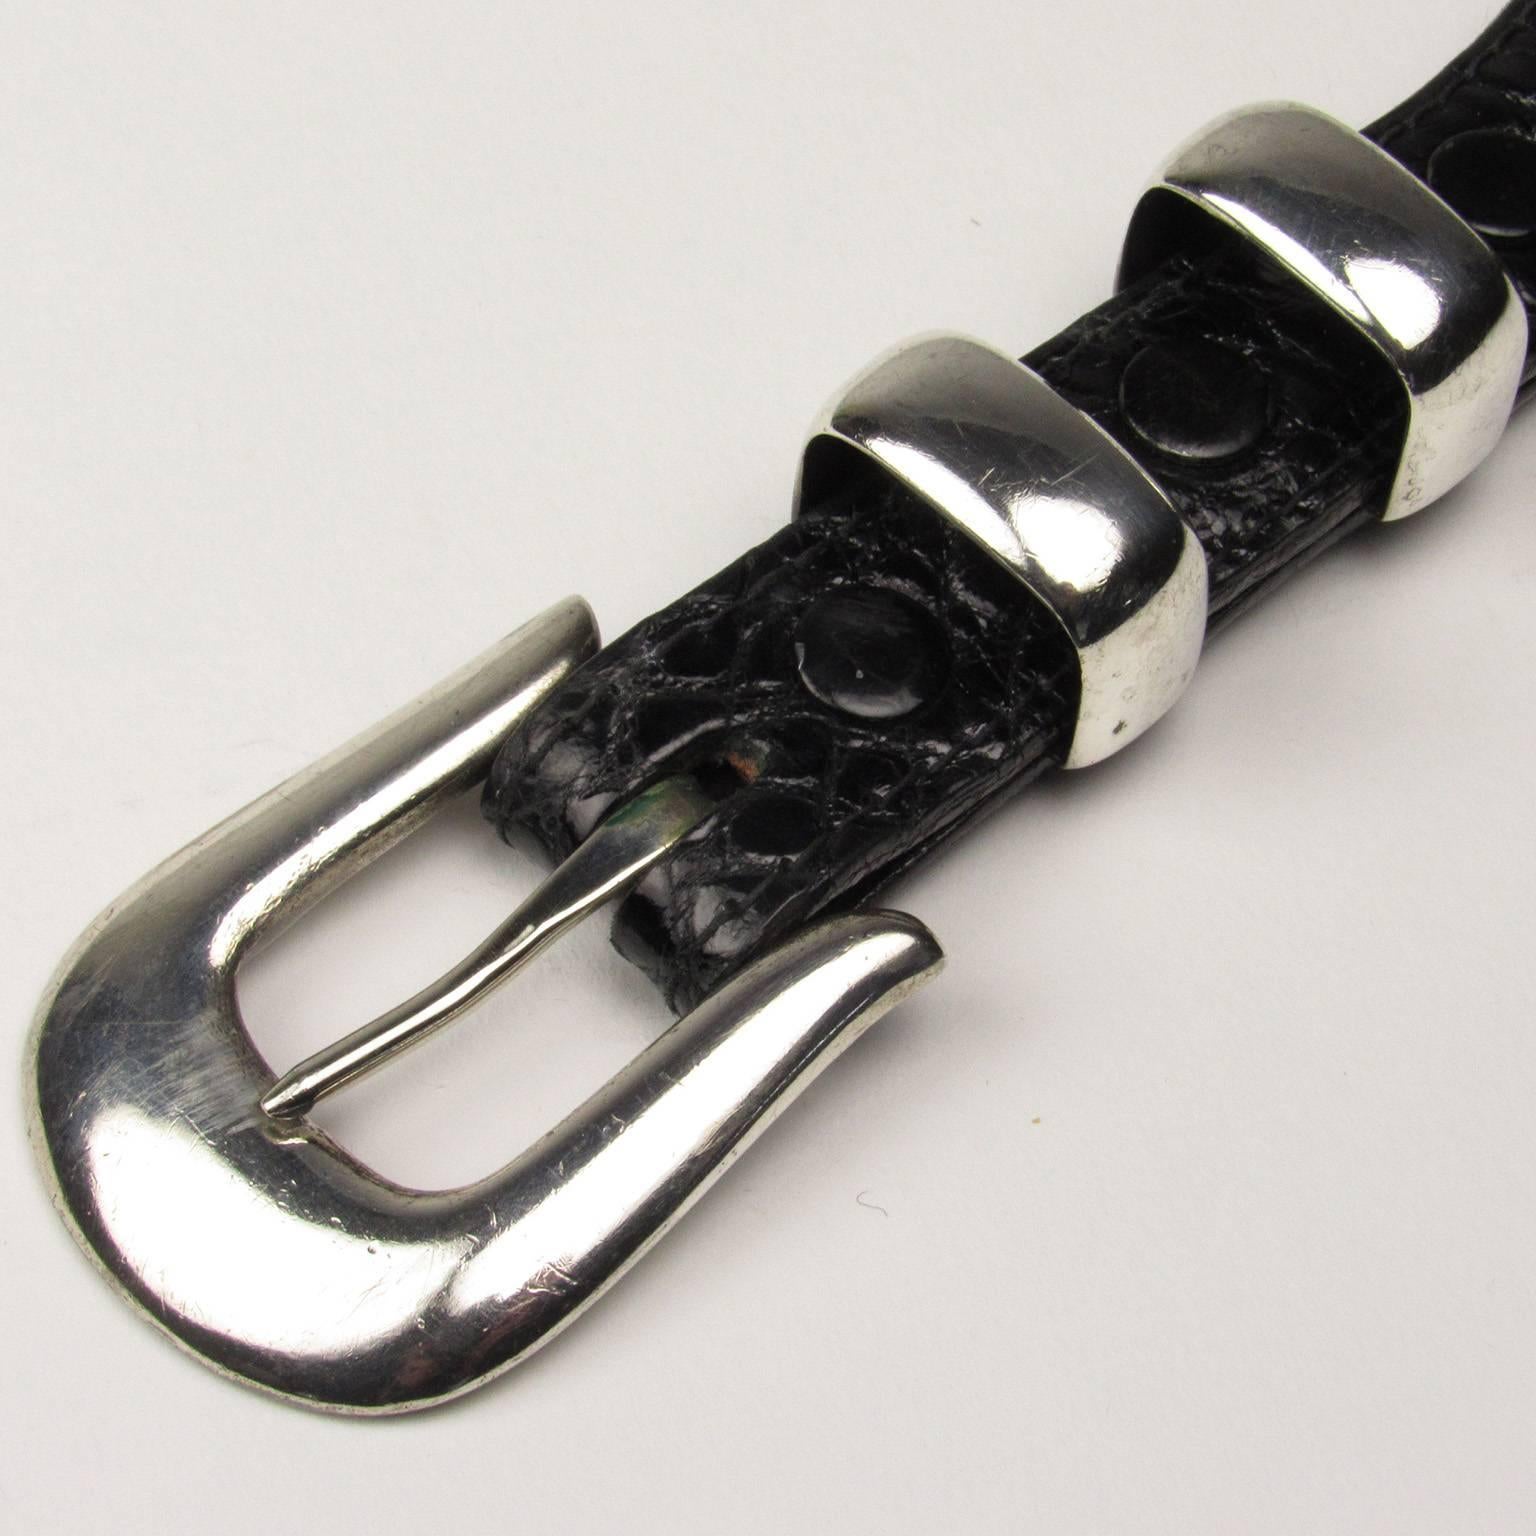 20th Century Billy Martin Black Aligator Leather Belt with Doug Magnus Sterling Silver Buckle